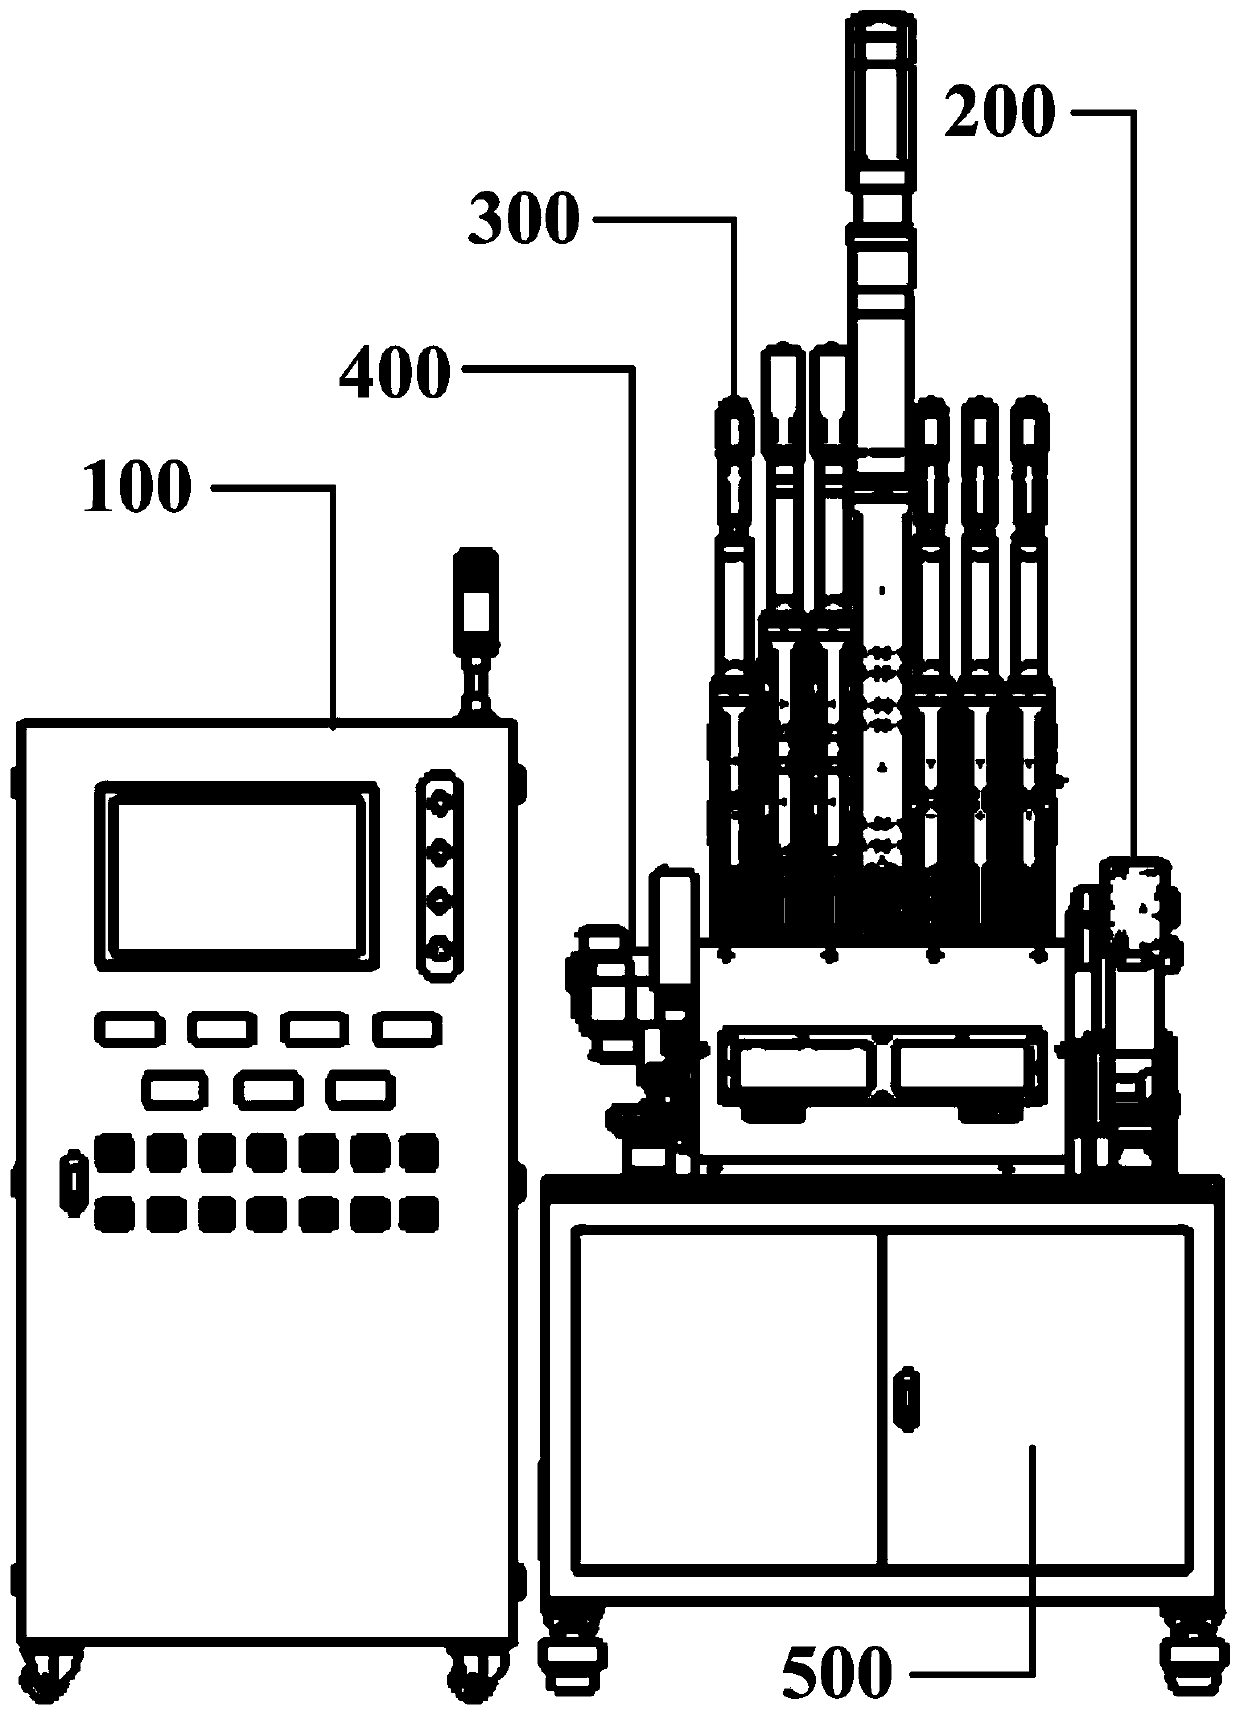 An all-motor-driven precision molding machine and its operating method